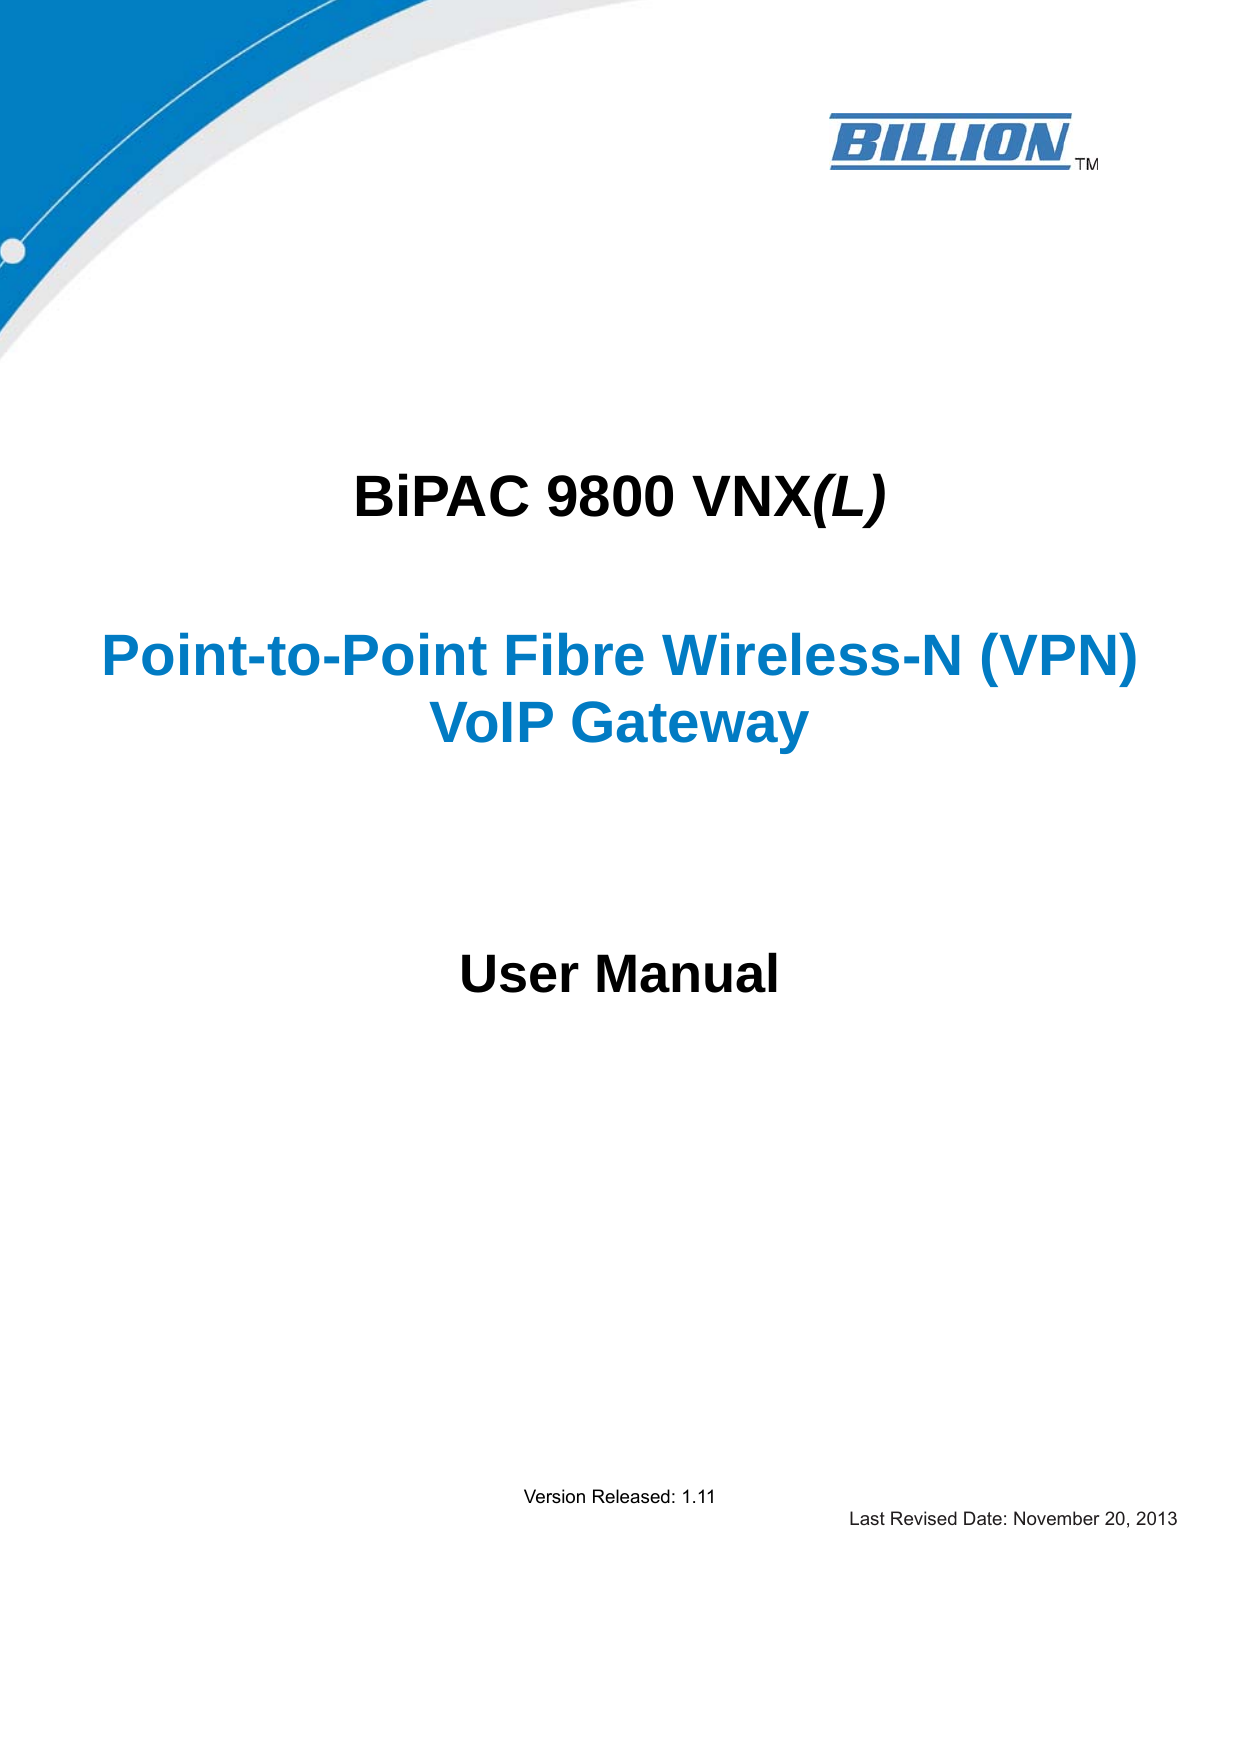     BiPAC 9800 VNX(L)  Point-to-Point Fibre Wireless-N (VPN) VoIP Gateway    User Manual                Version Released: 1.11 Last Revised Date: November 20, 2013 